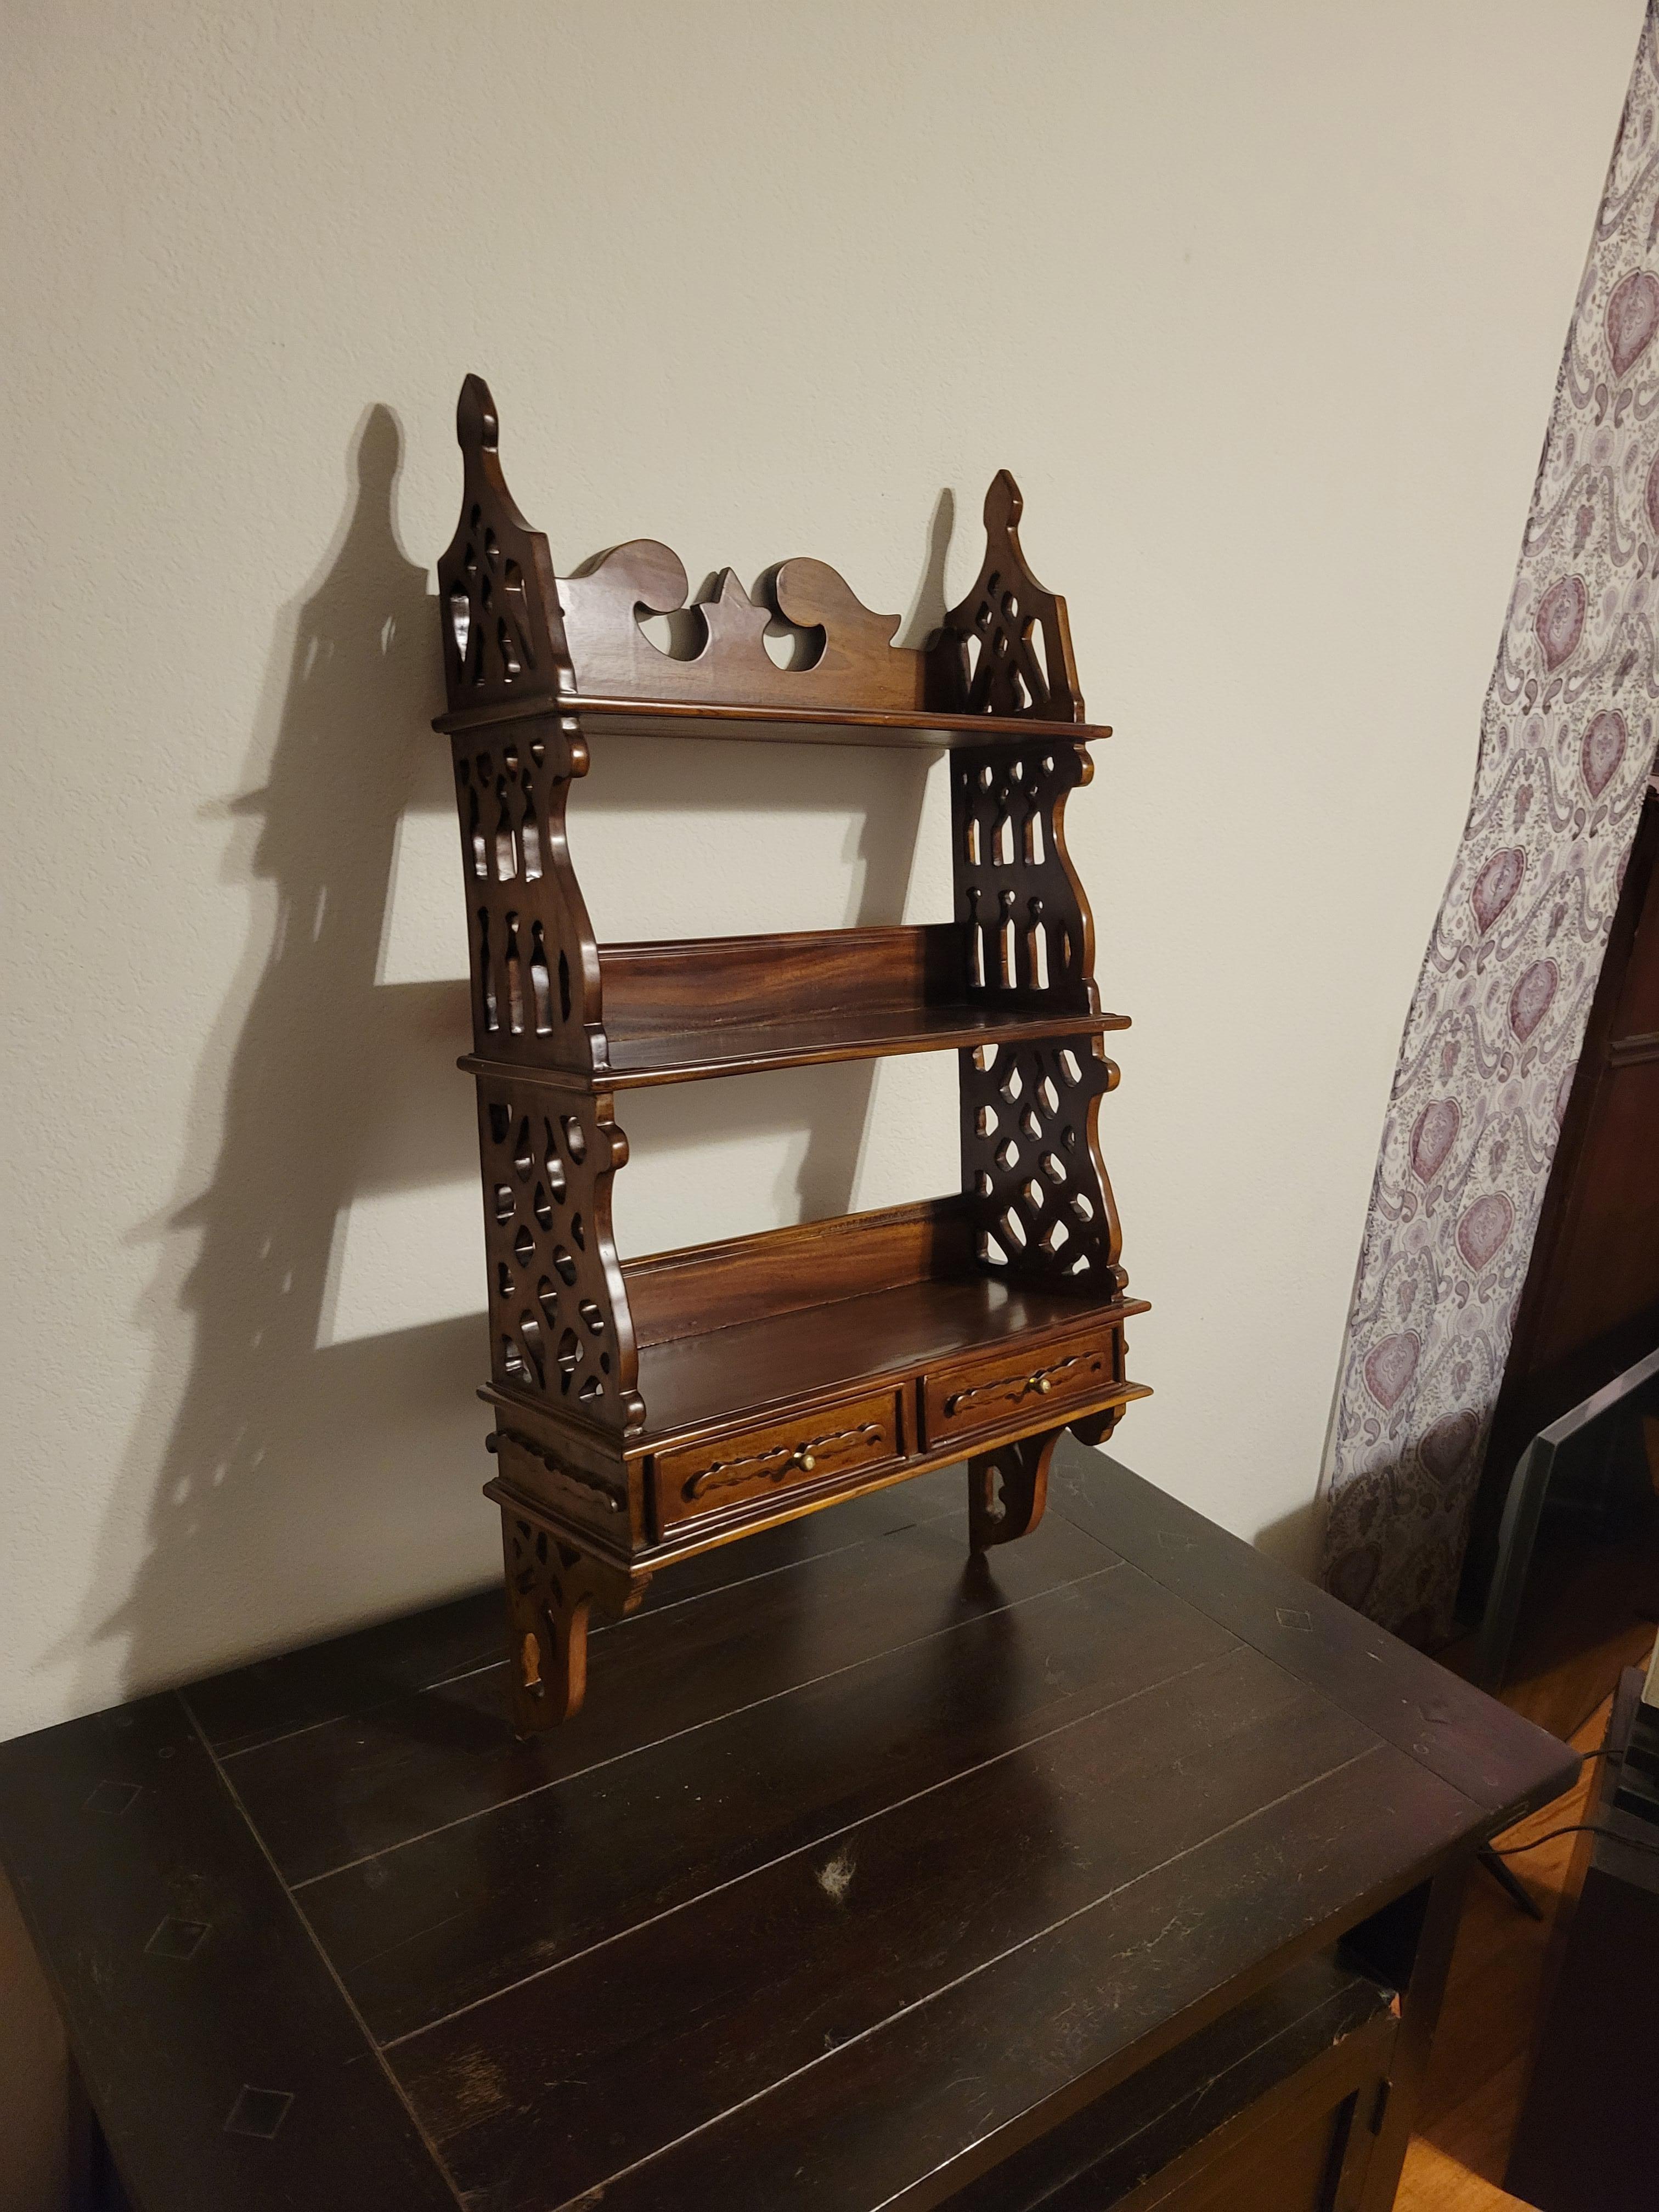 Antique kitchen shelf, with hand-caved sides. It has 3 tiers and 2 drawers at the bottom. Made out of solid likely African Mahogany. The shelf is 35